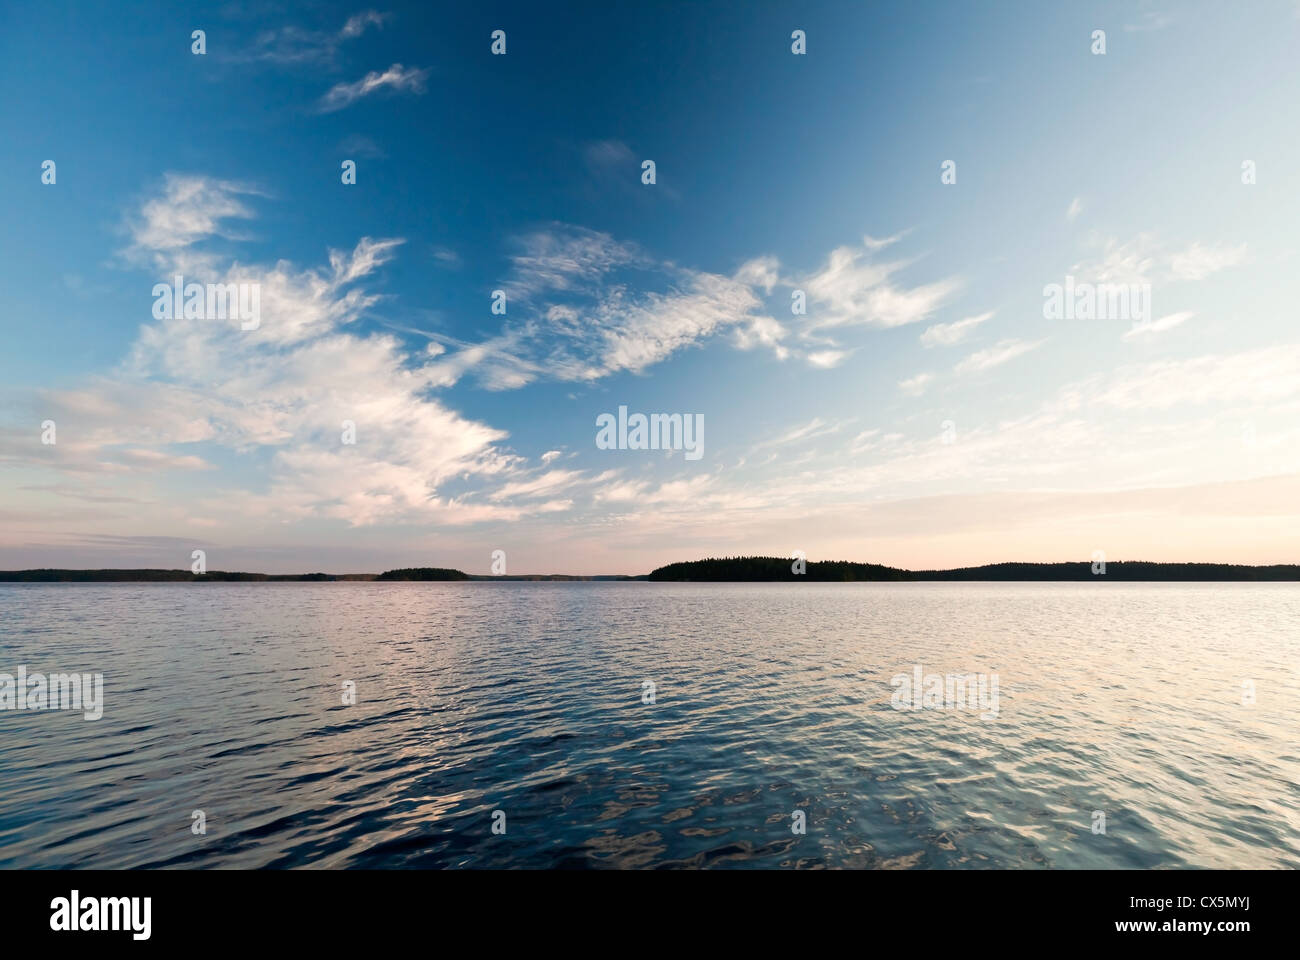 Coastline of Saimaa lake with clouds reflected on still water Stock Photo